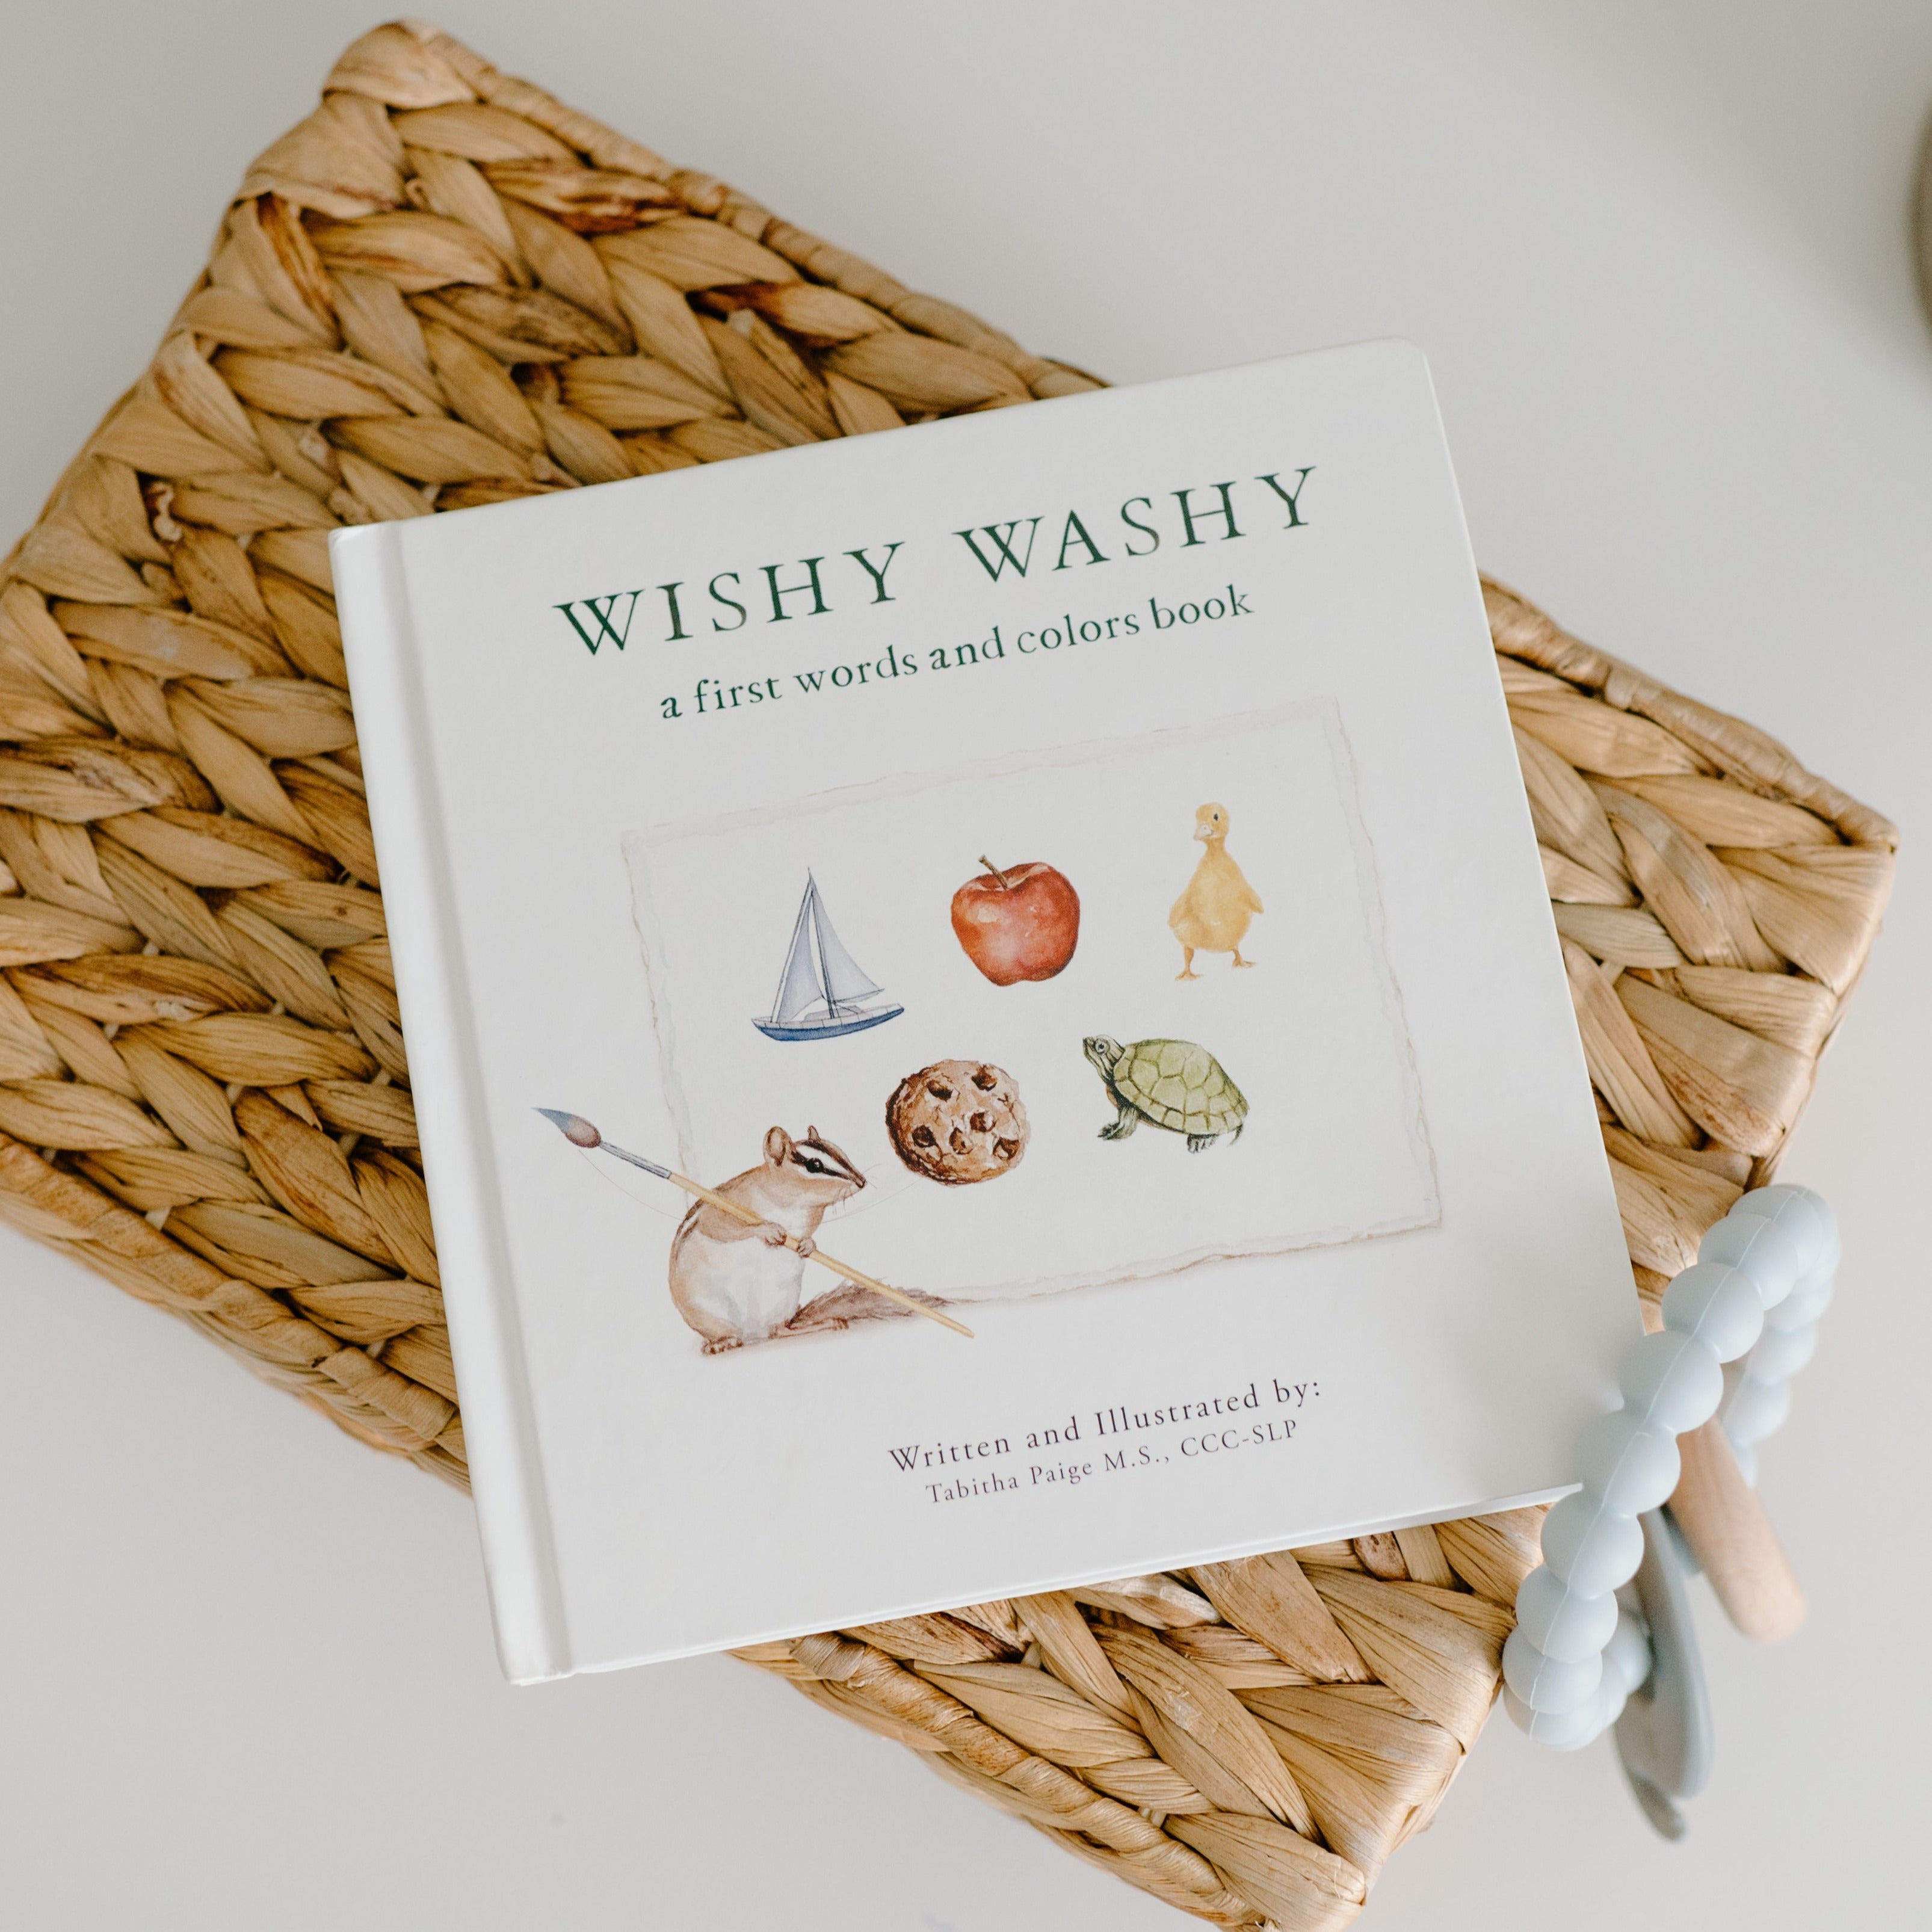 Wishy Washy: A Board Book of First Words and Colors – Paige Tate